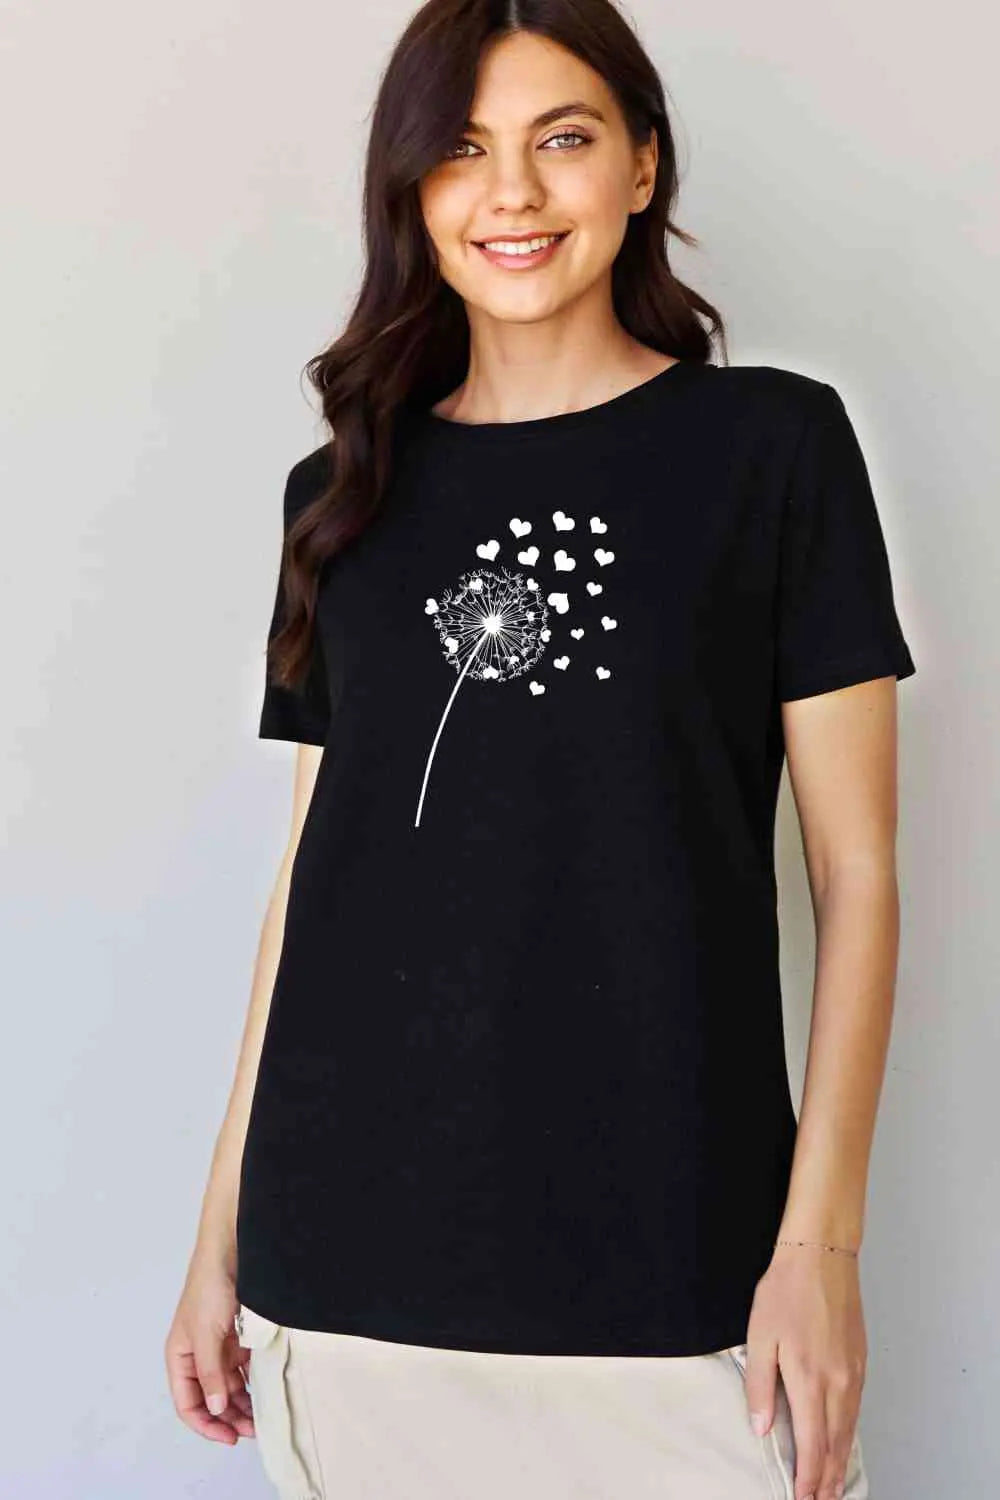 Simply Love Full Size Dandelion Heart Graphic Cotton T-Shirt - Image #4